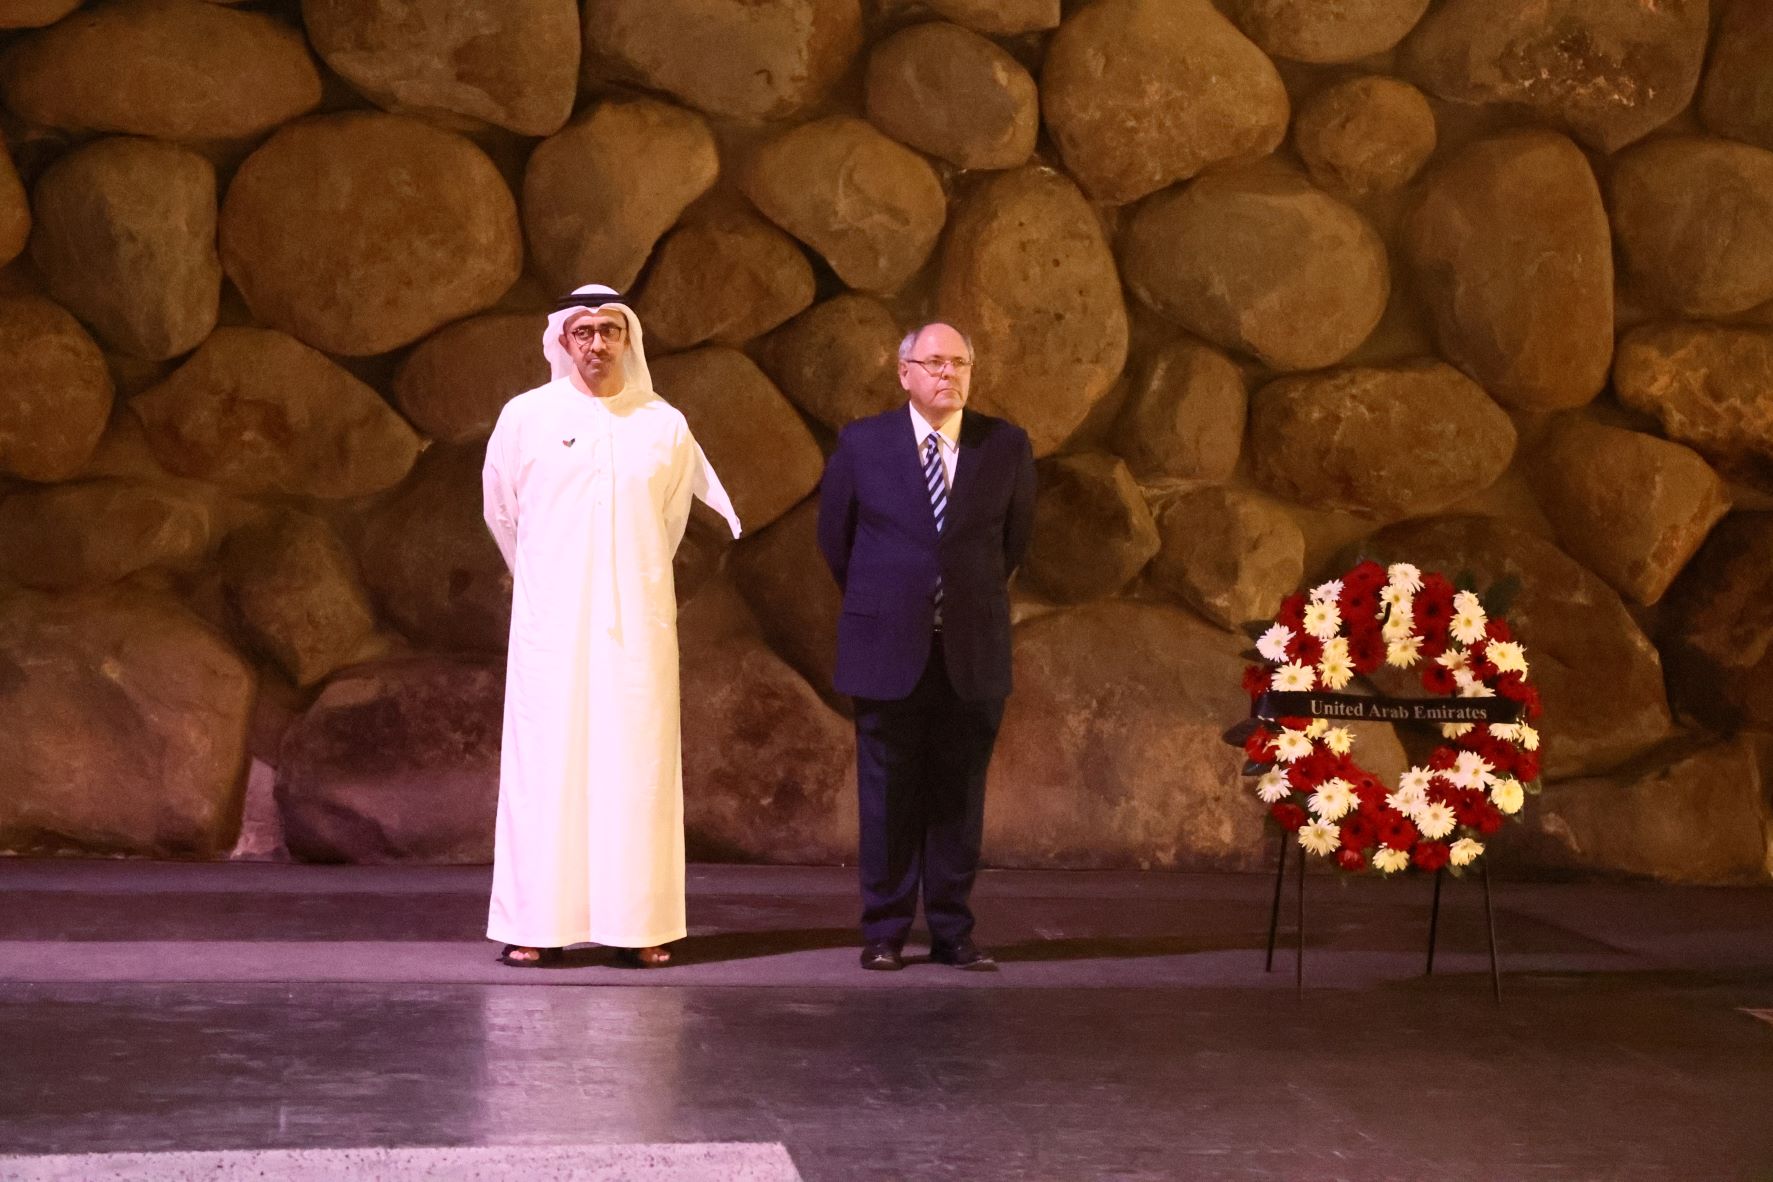 Minister Al Nahyan and Dani Dayan participate in a memorial ceremony in the Hall of Remembrance at Yad Vashem 